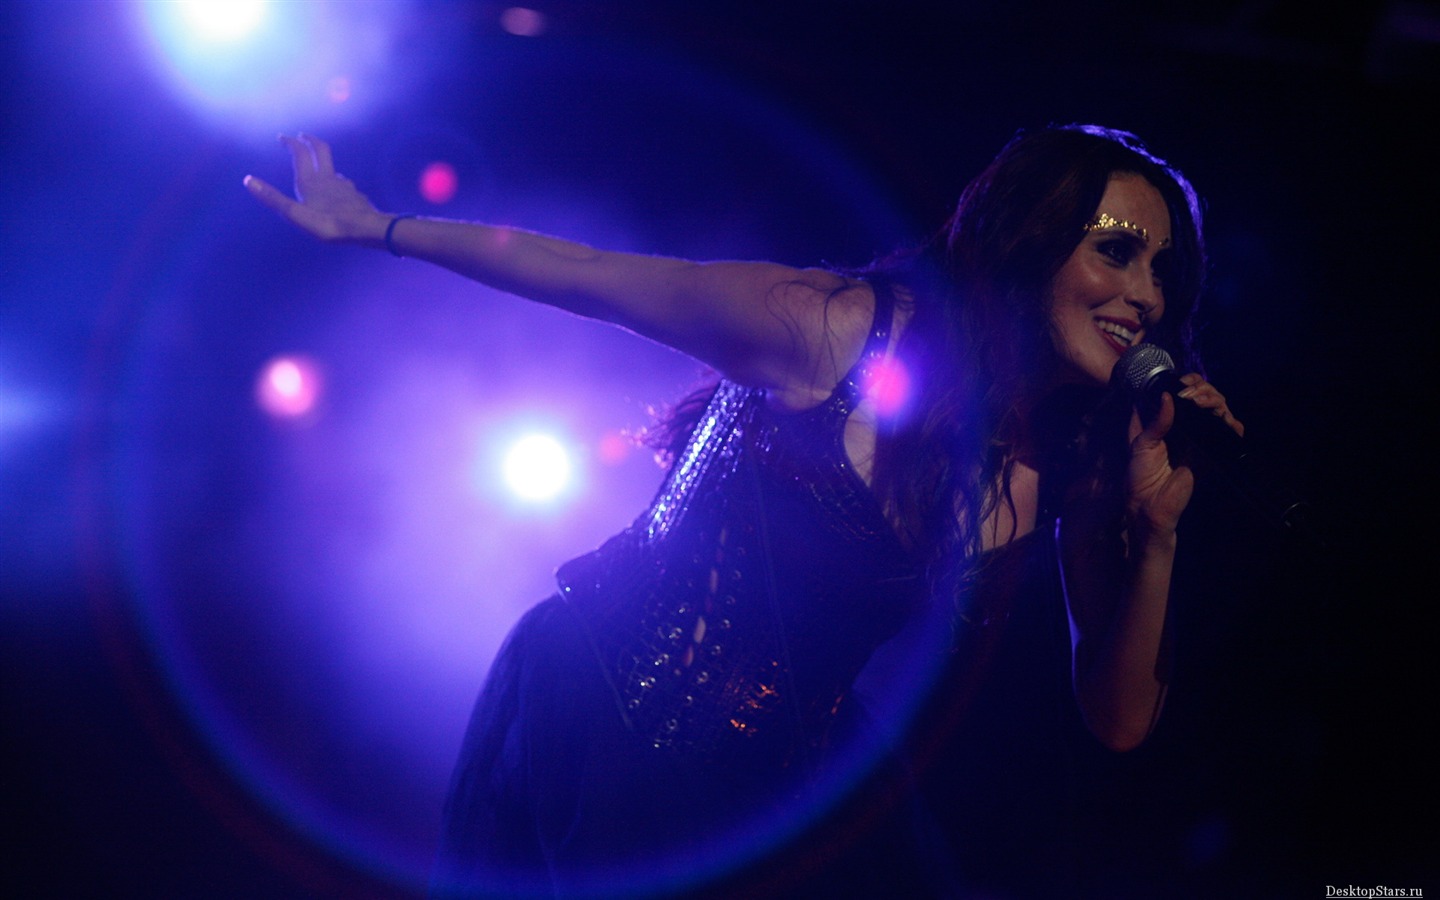 Sharon den Adel #013 - 1440x900 Wallpapers Pictures Photos Images